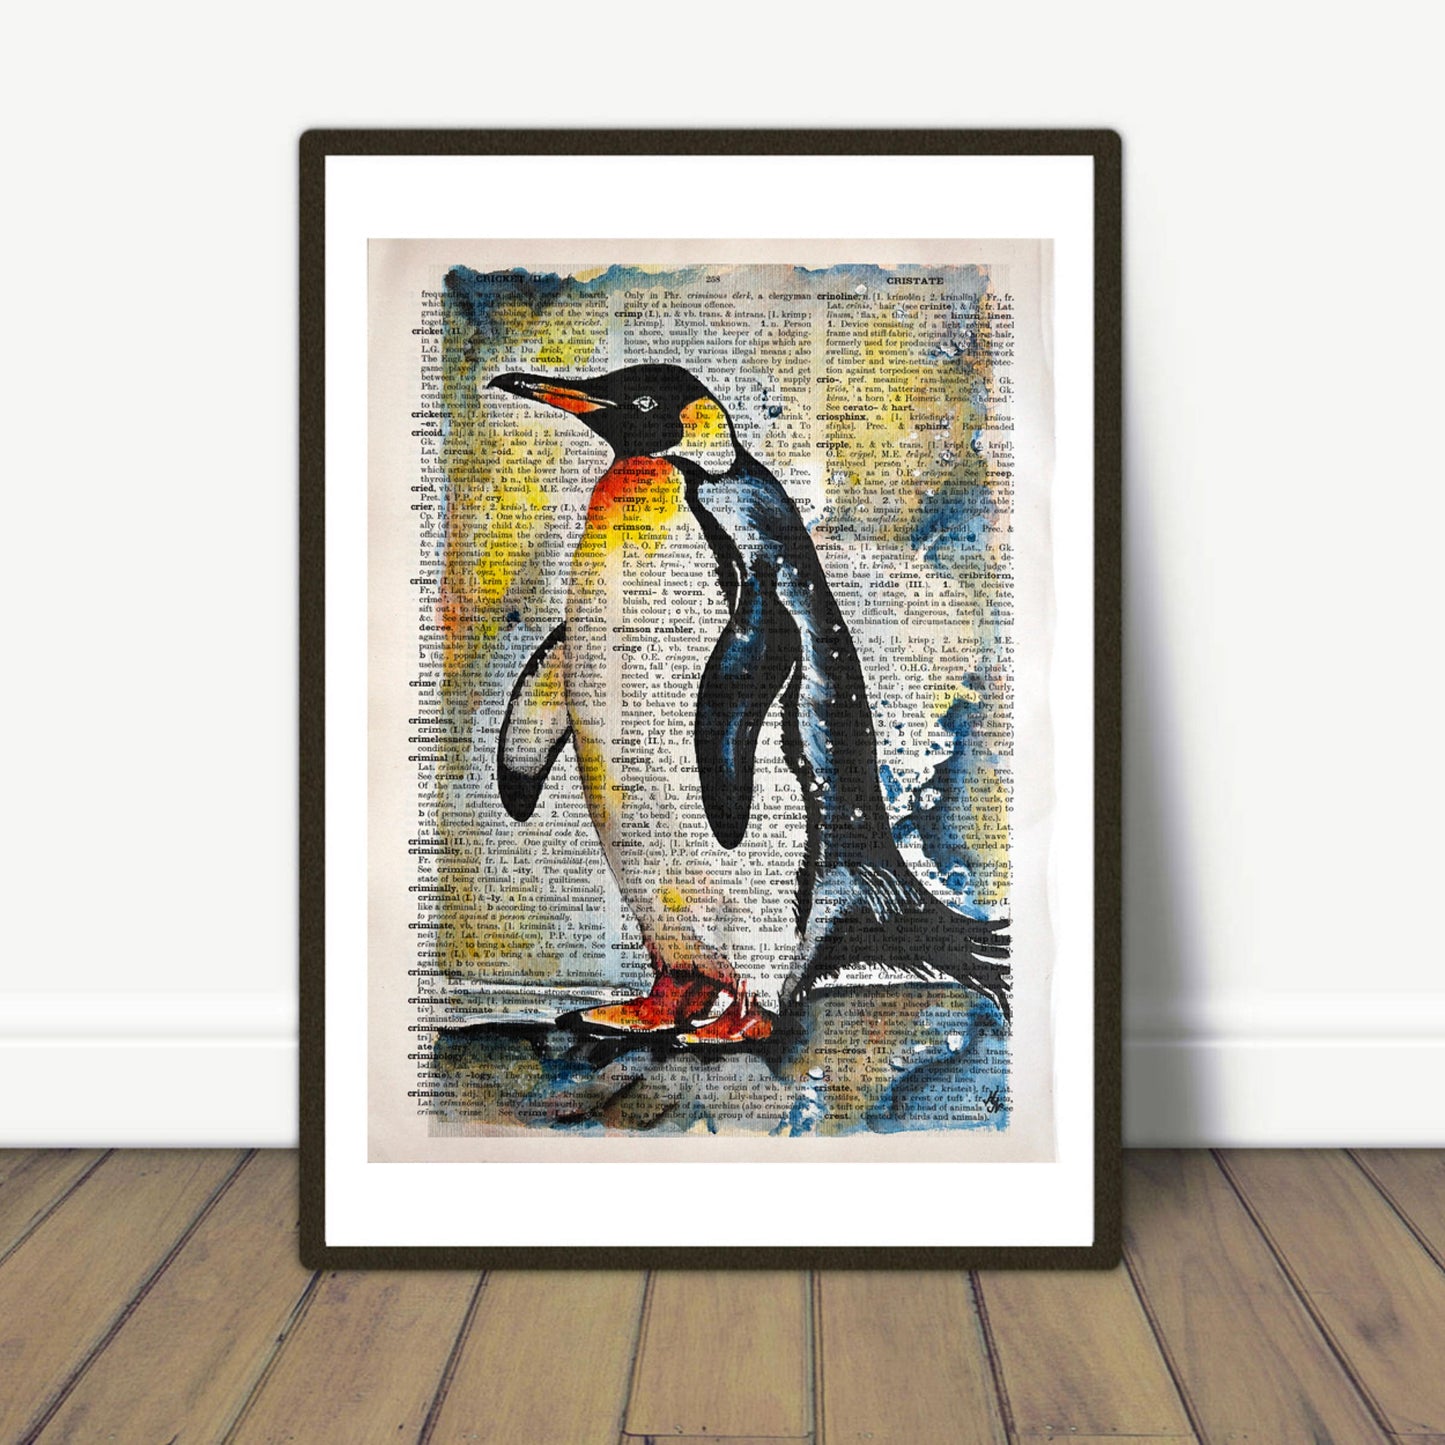 Digital art of "The Penguin," created from a painting on a repurposed vintage English dictionary page.